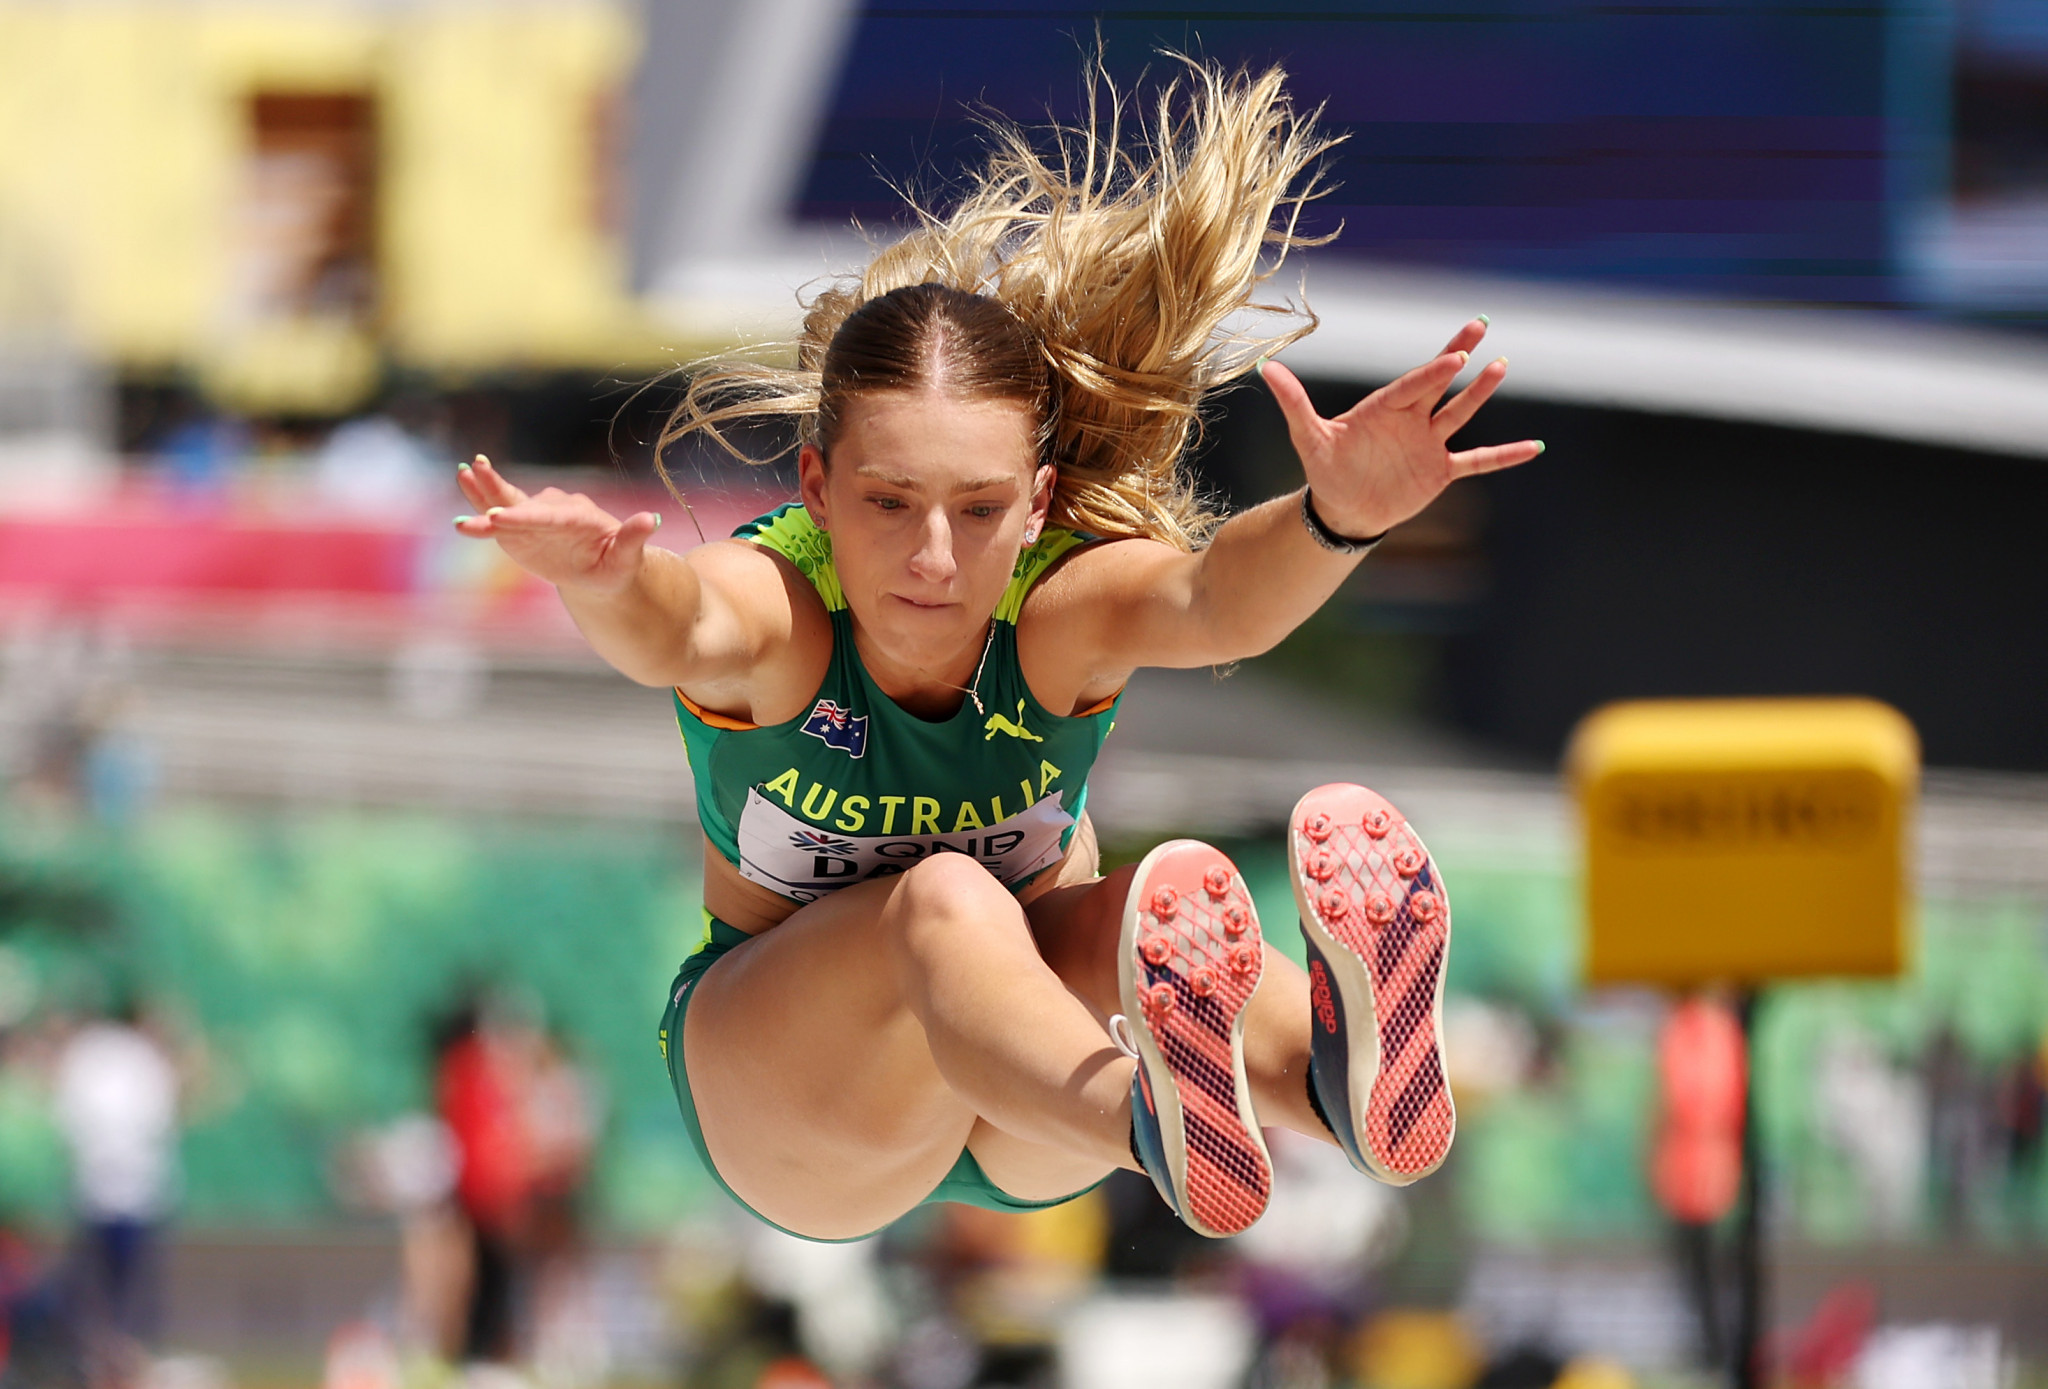 Australian champion Samantha Dale competes in women's long jump qualifying ©Getty Images